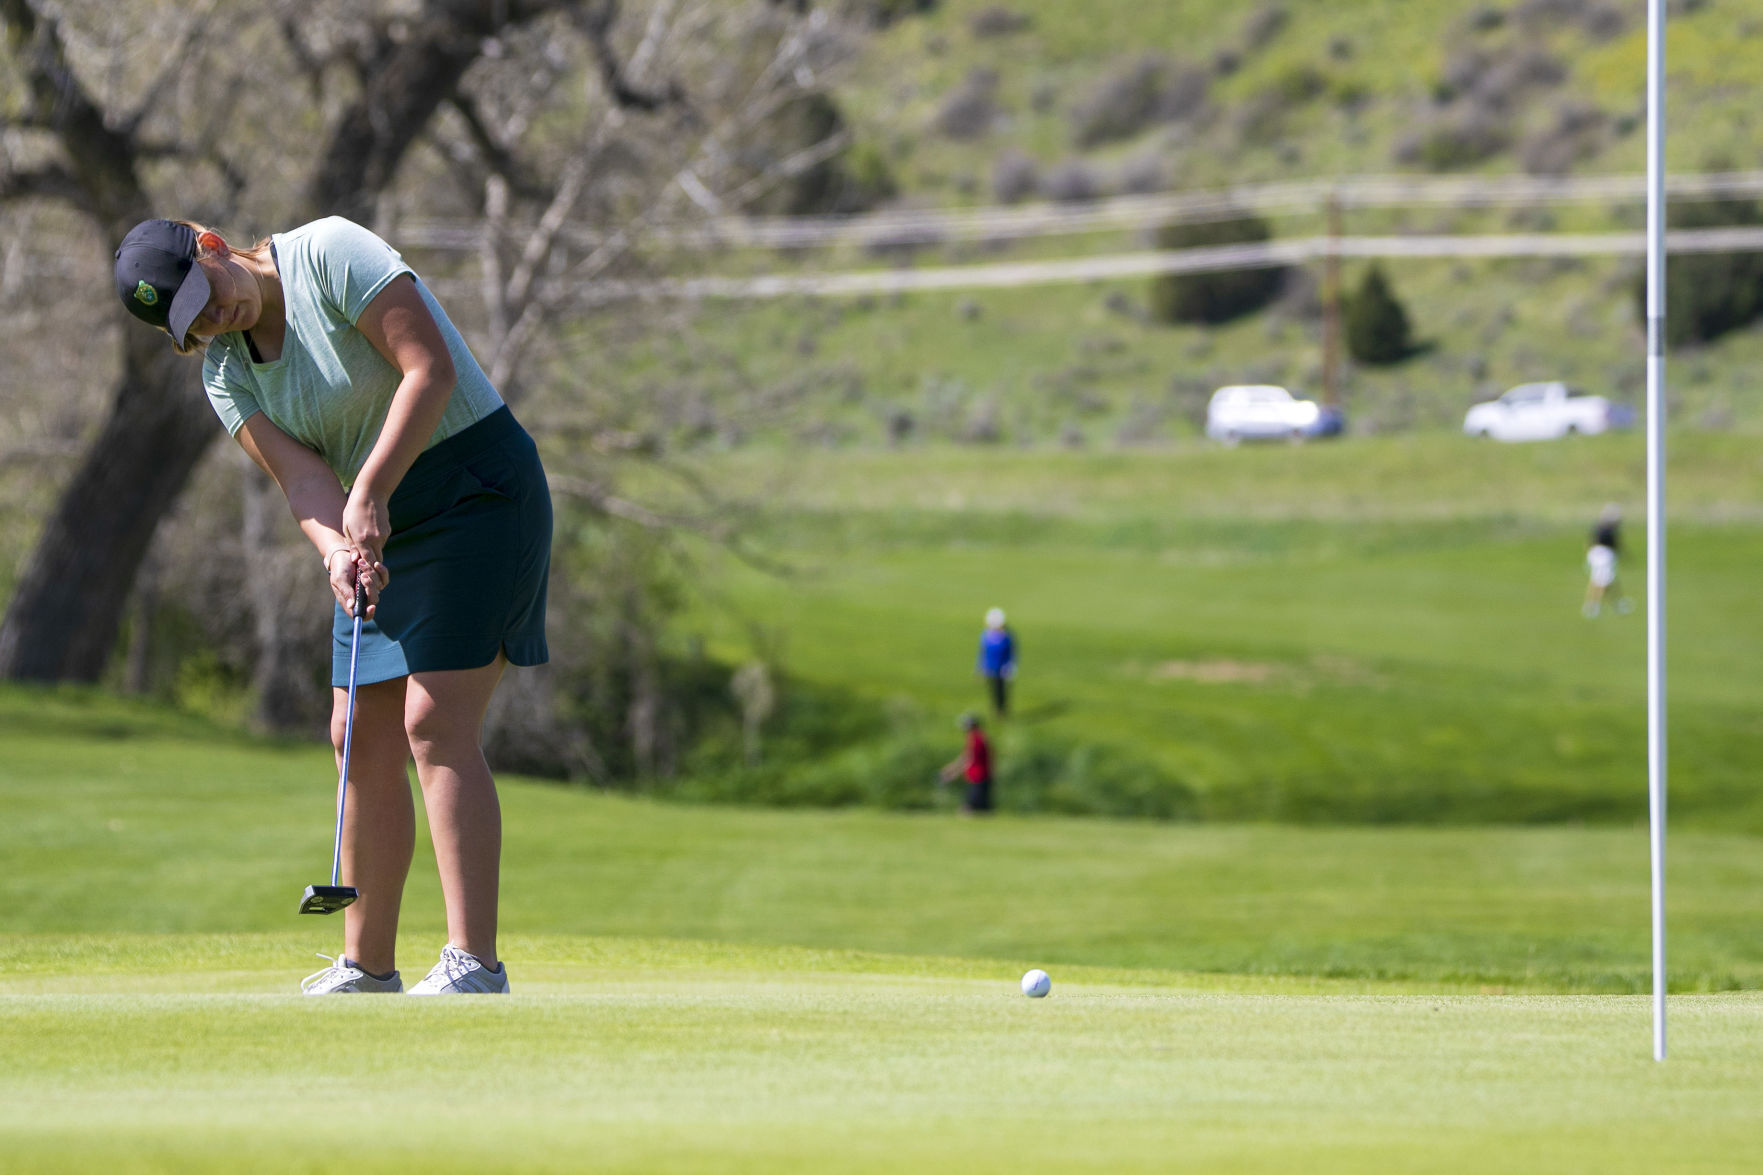 Womens State Amateur golf championship begins Thursday in Billings pic